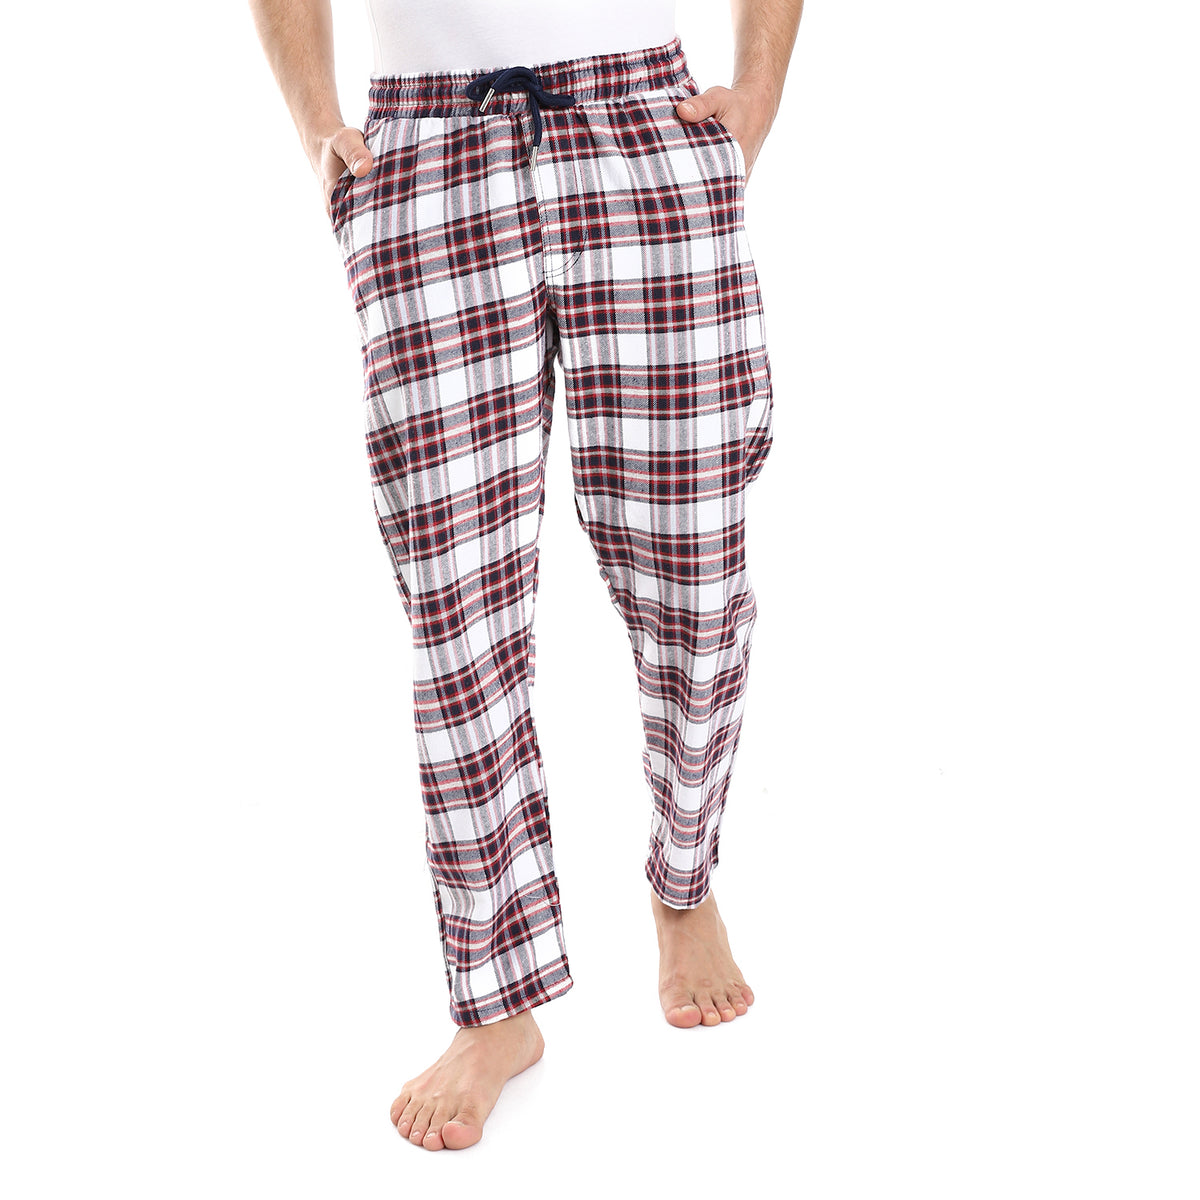 Men's red cotton check pants-Red